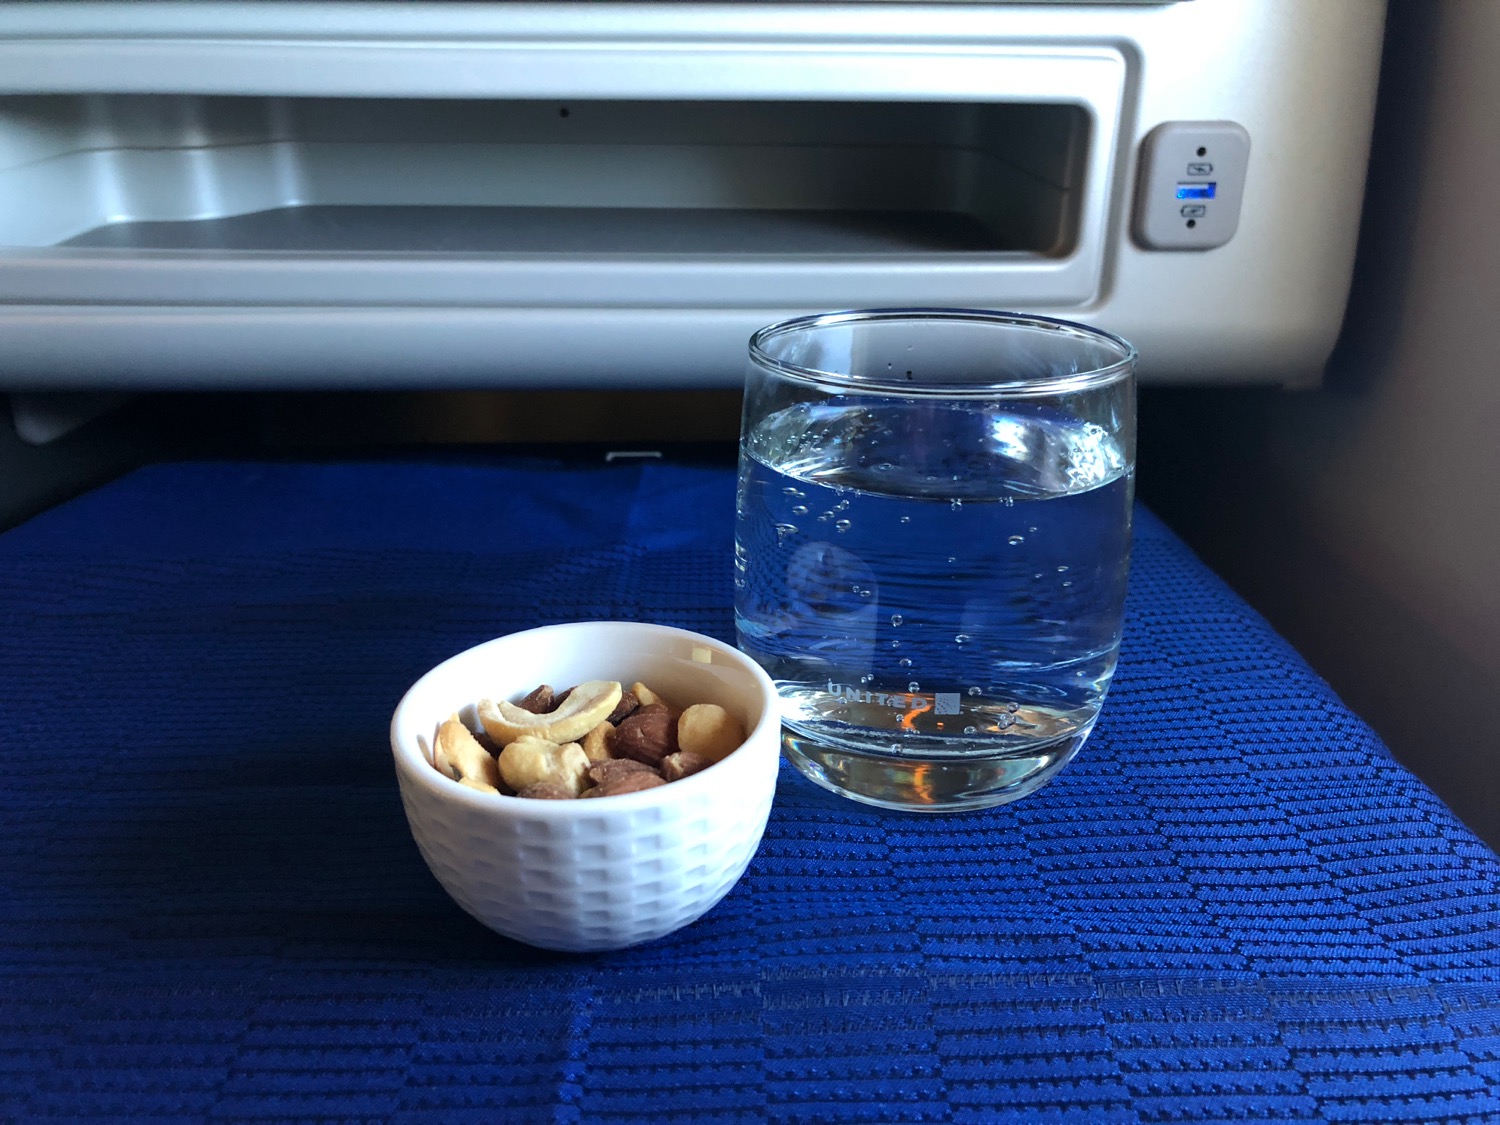 a bowl of nuts and a glass of water next to a microwave